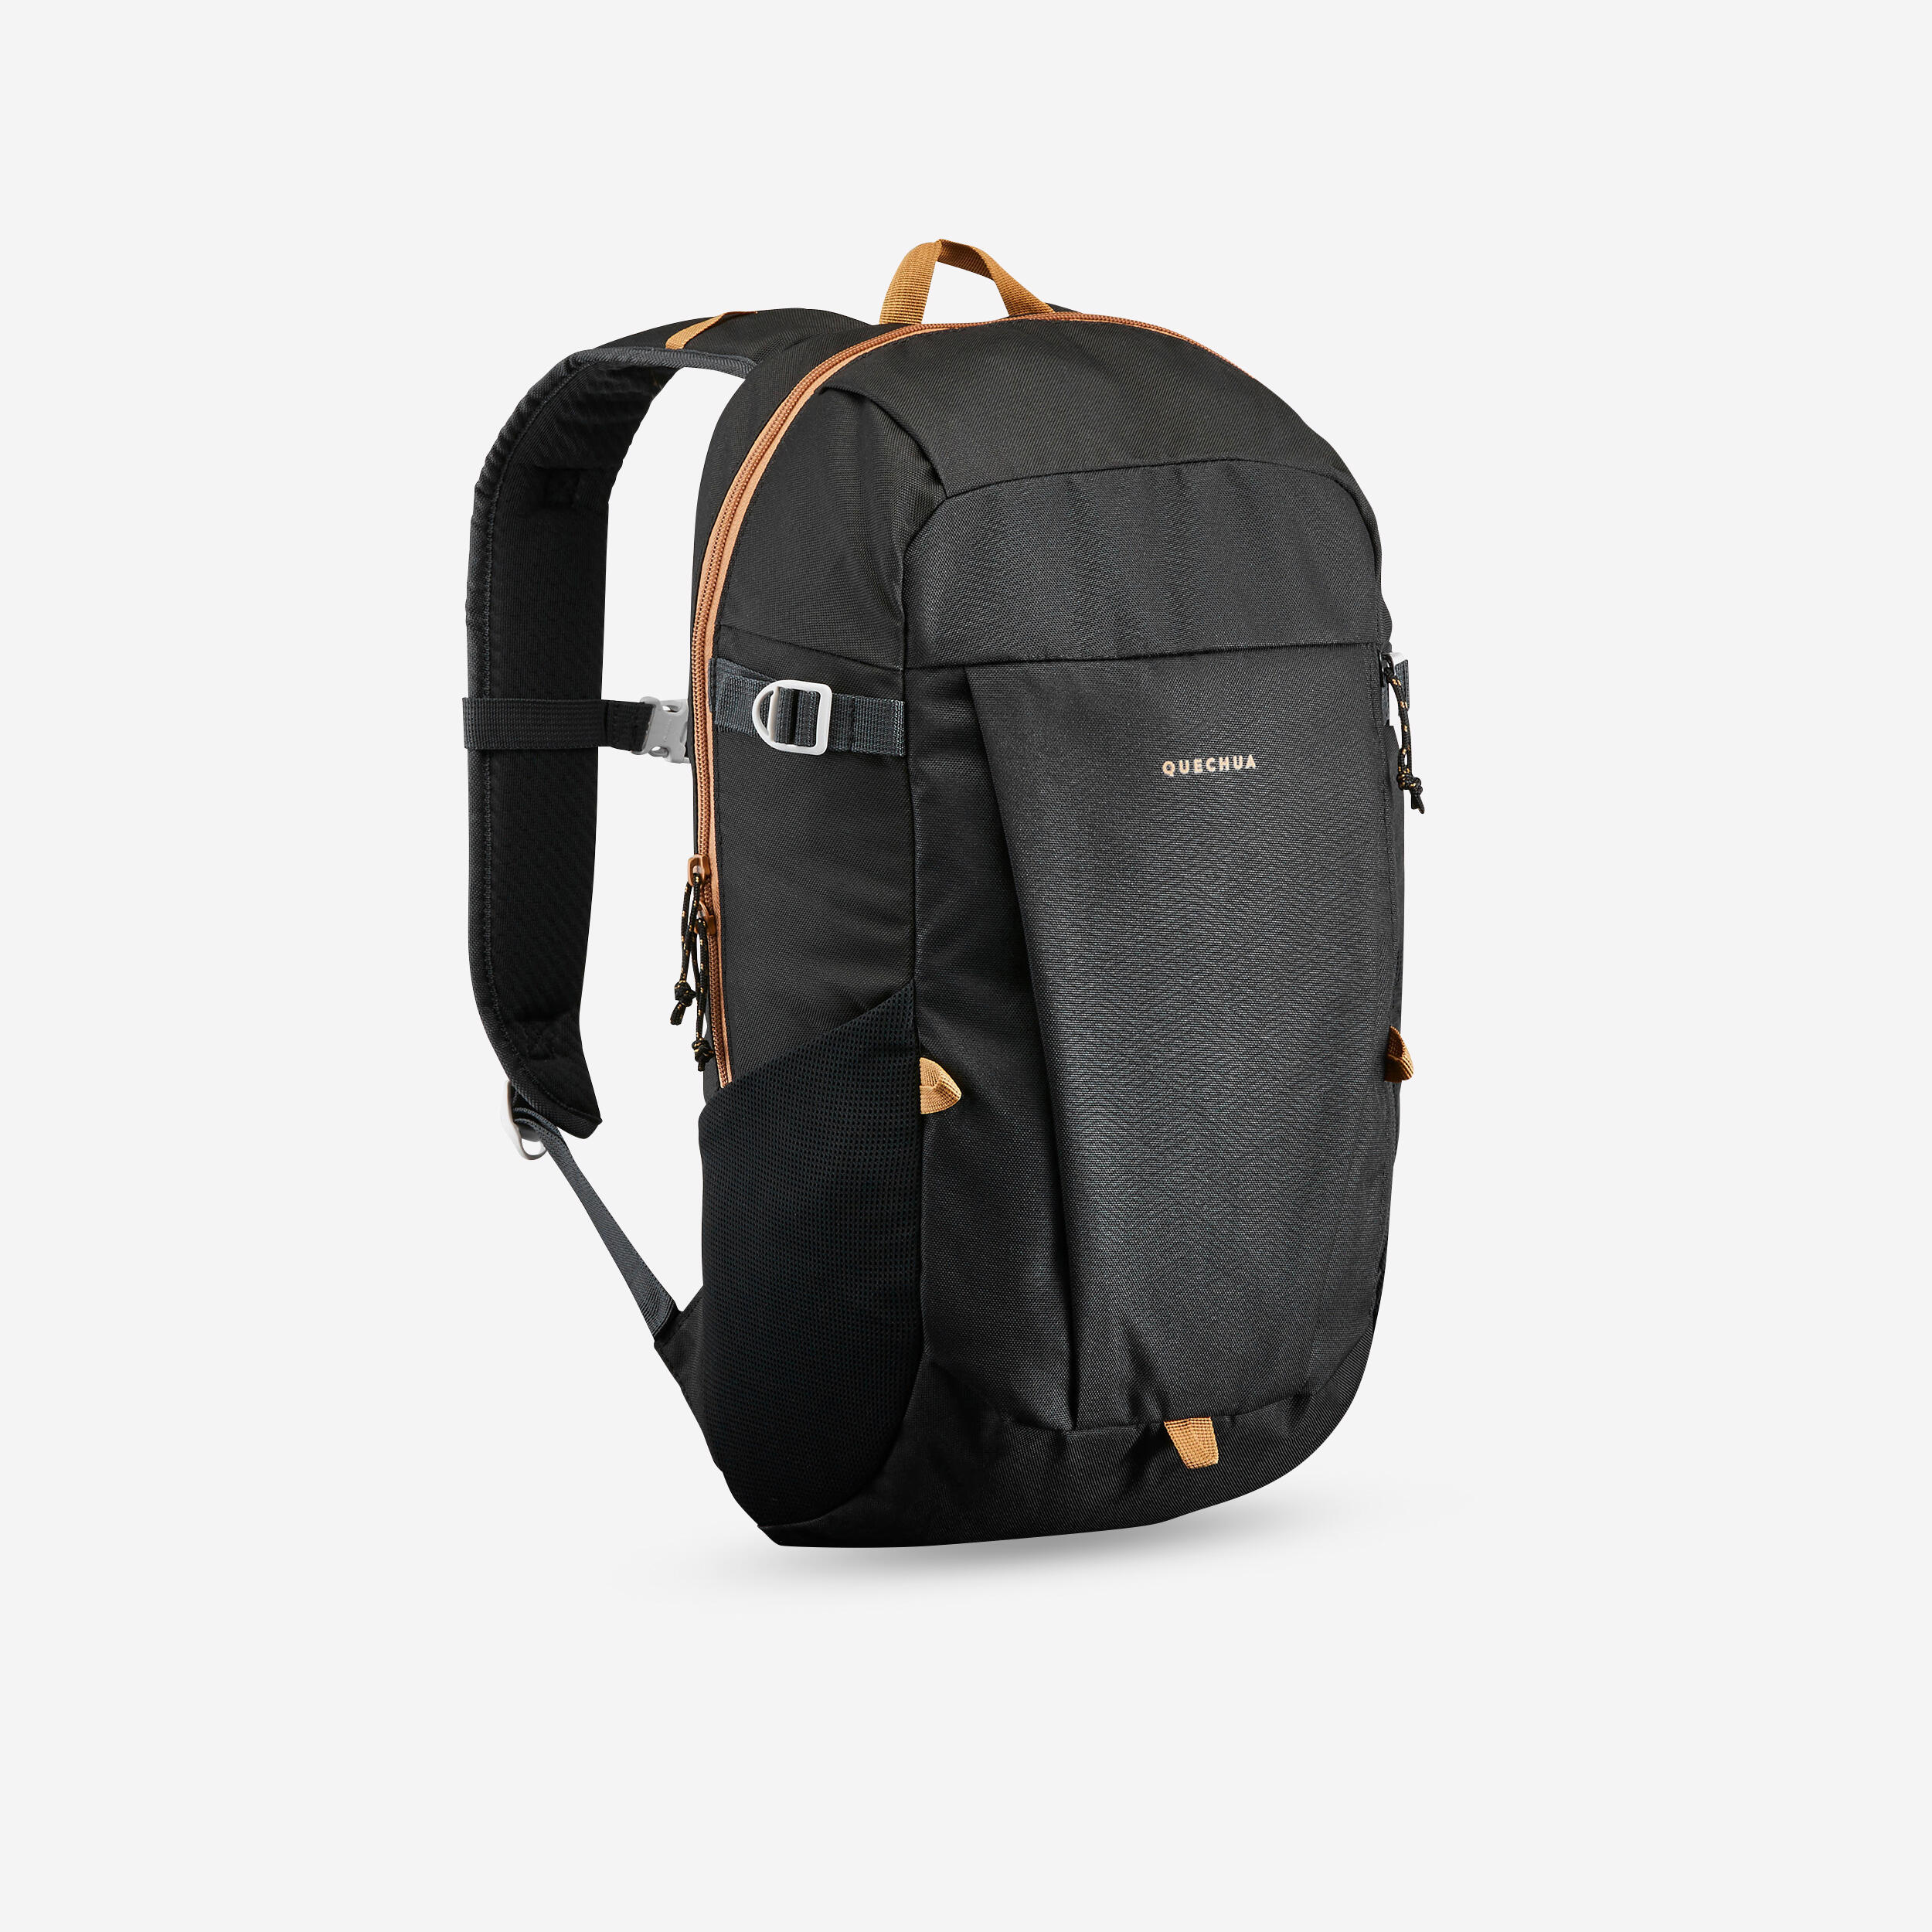 Quechua Hiking Backpack 20 L - Nh Arpenaz 100